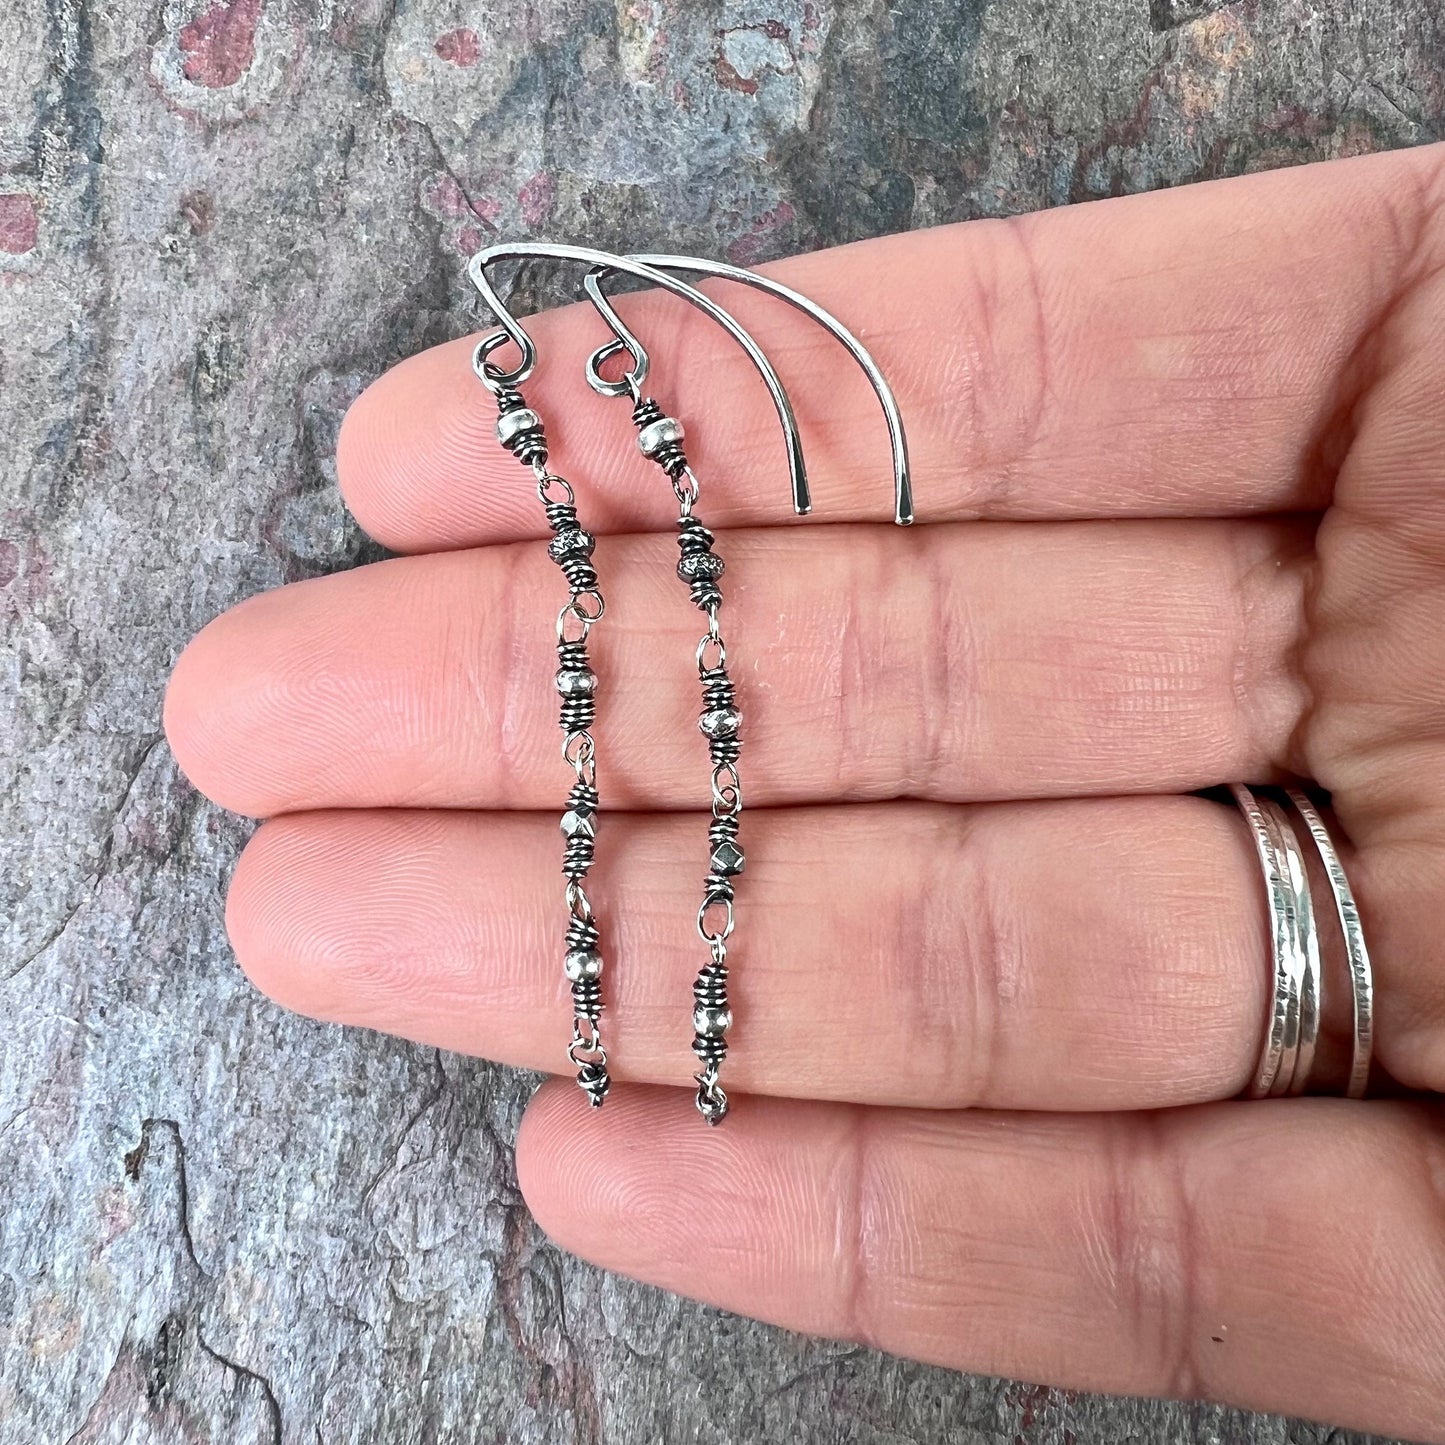 Long Sterling Silver Wire-wrapped Beaded Earrings - Modern and Lightweight Everyday Earrings